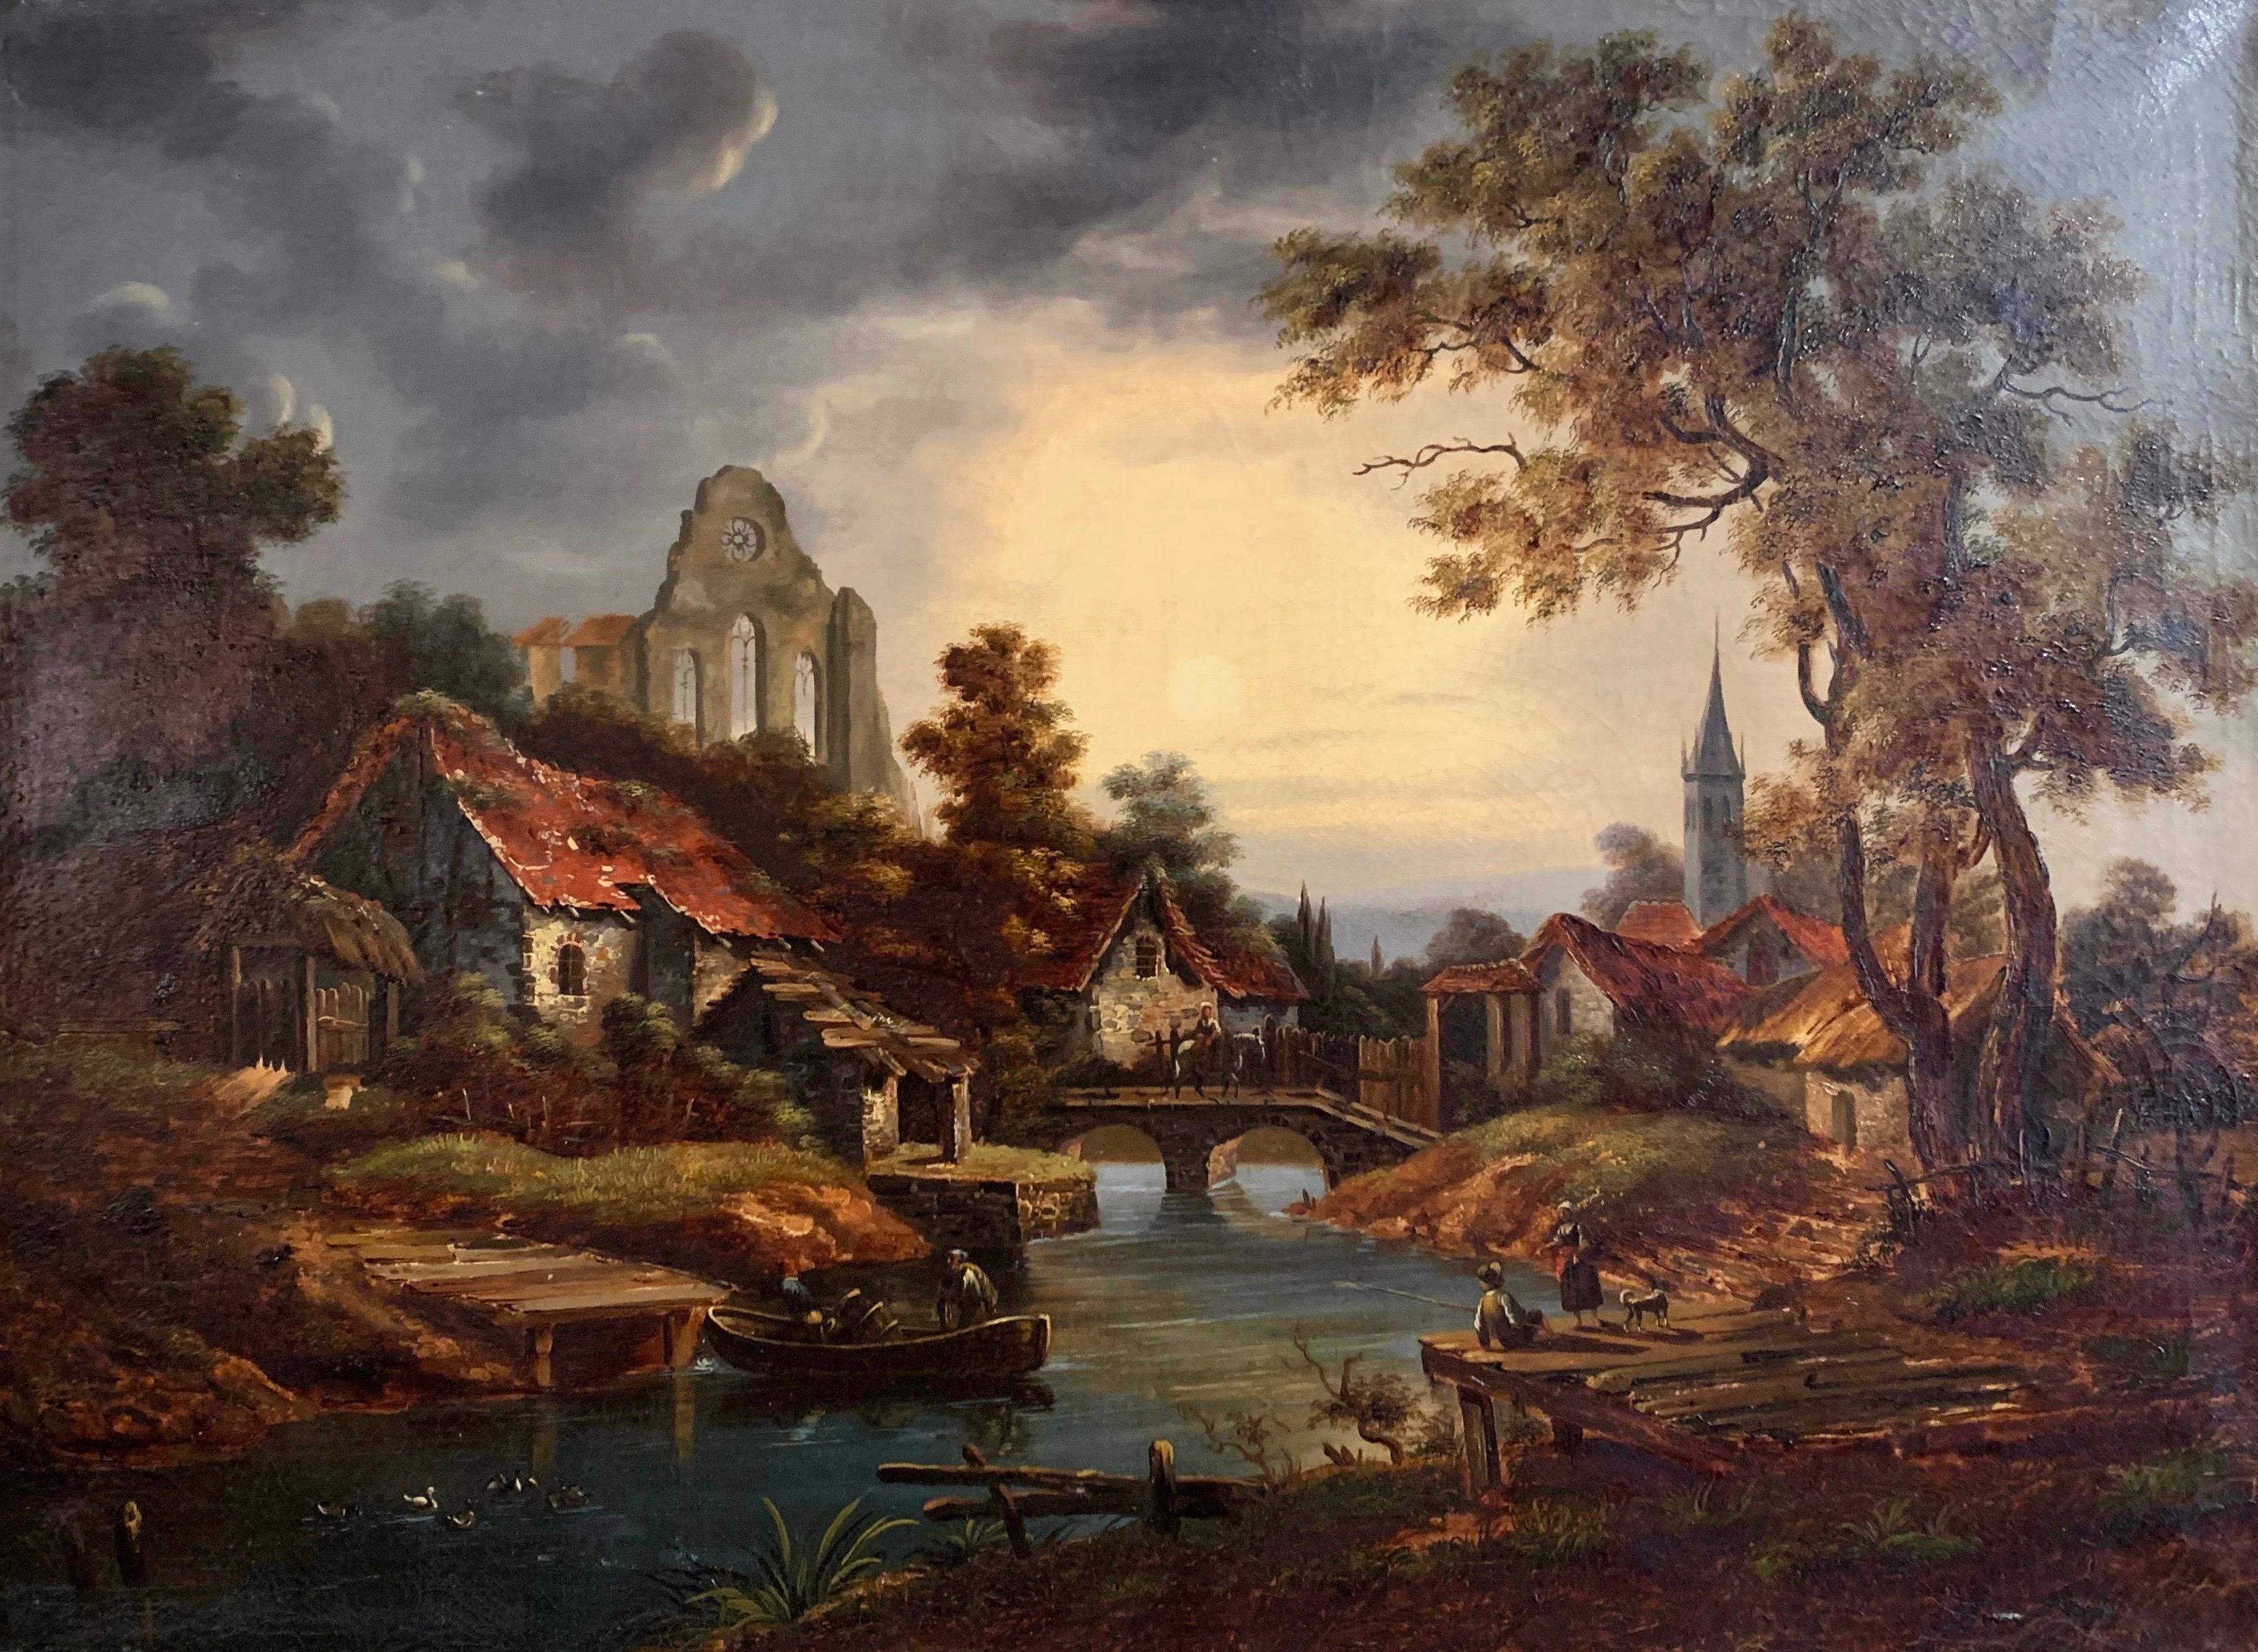 Set in the original carved gilt frame and painted in France circa 1780, this antique painting depicts a typical pastoral French village in a landscape landscape, with pond, fishermen and farmers. The artwork features wonderful details, including the